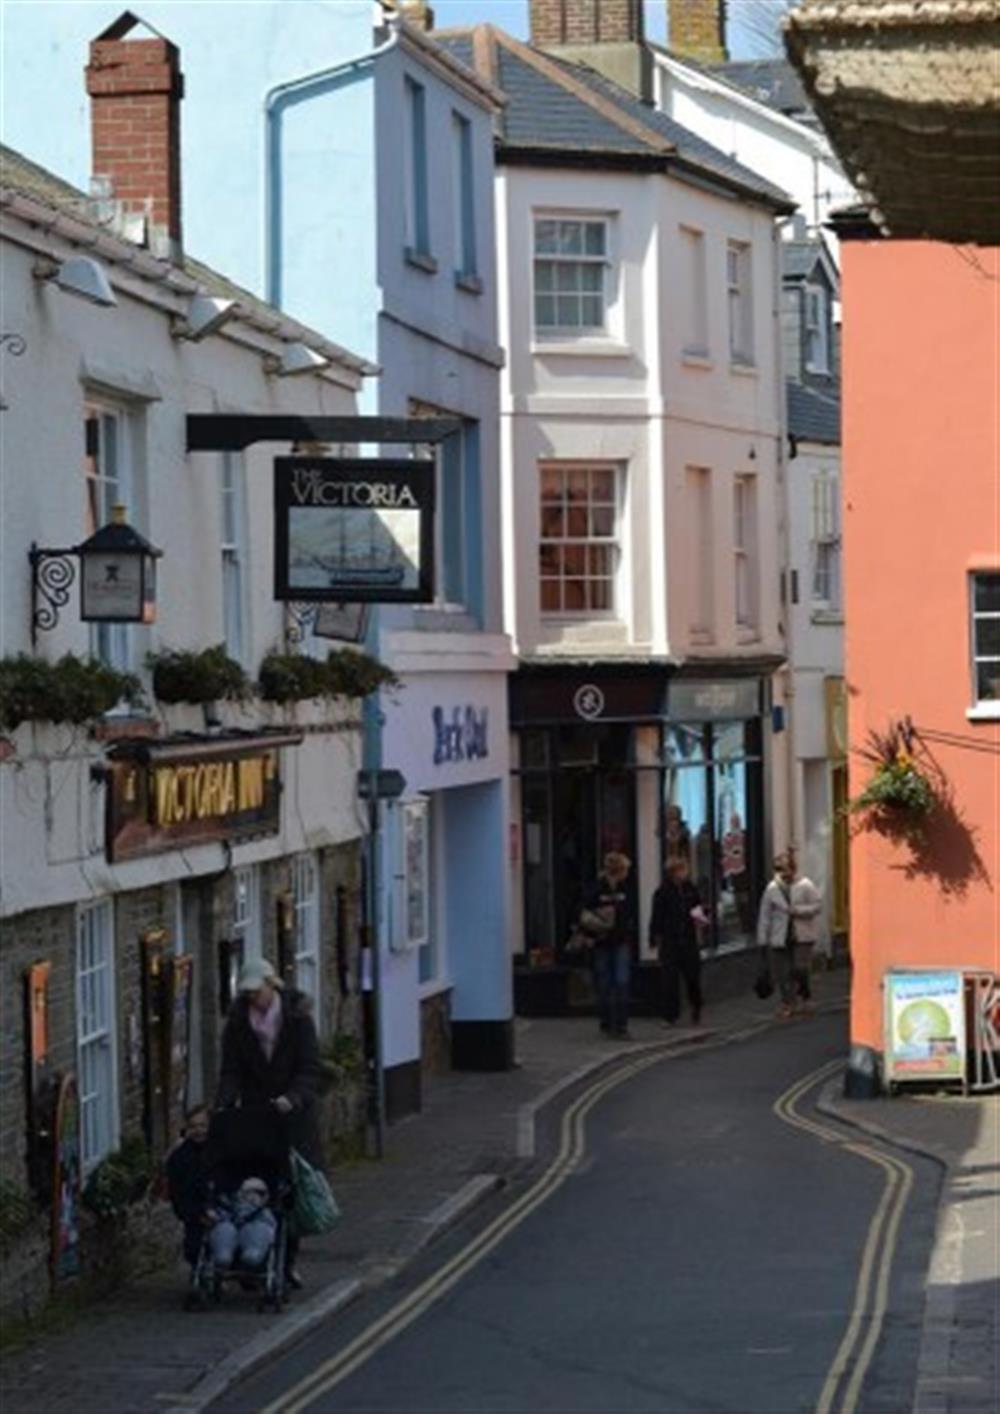 All the pubs, shops and restaurants Fore Street has to offer are within a short stroll